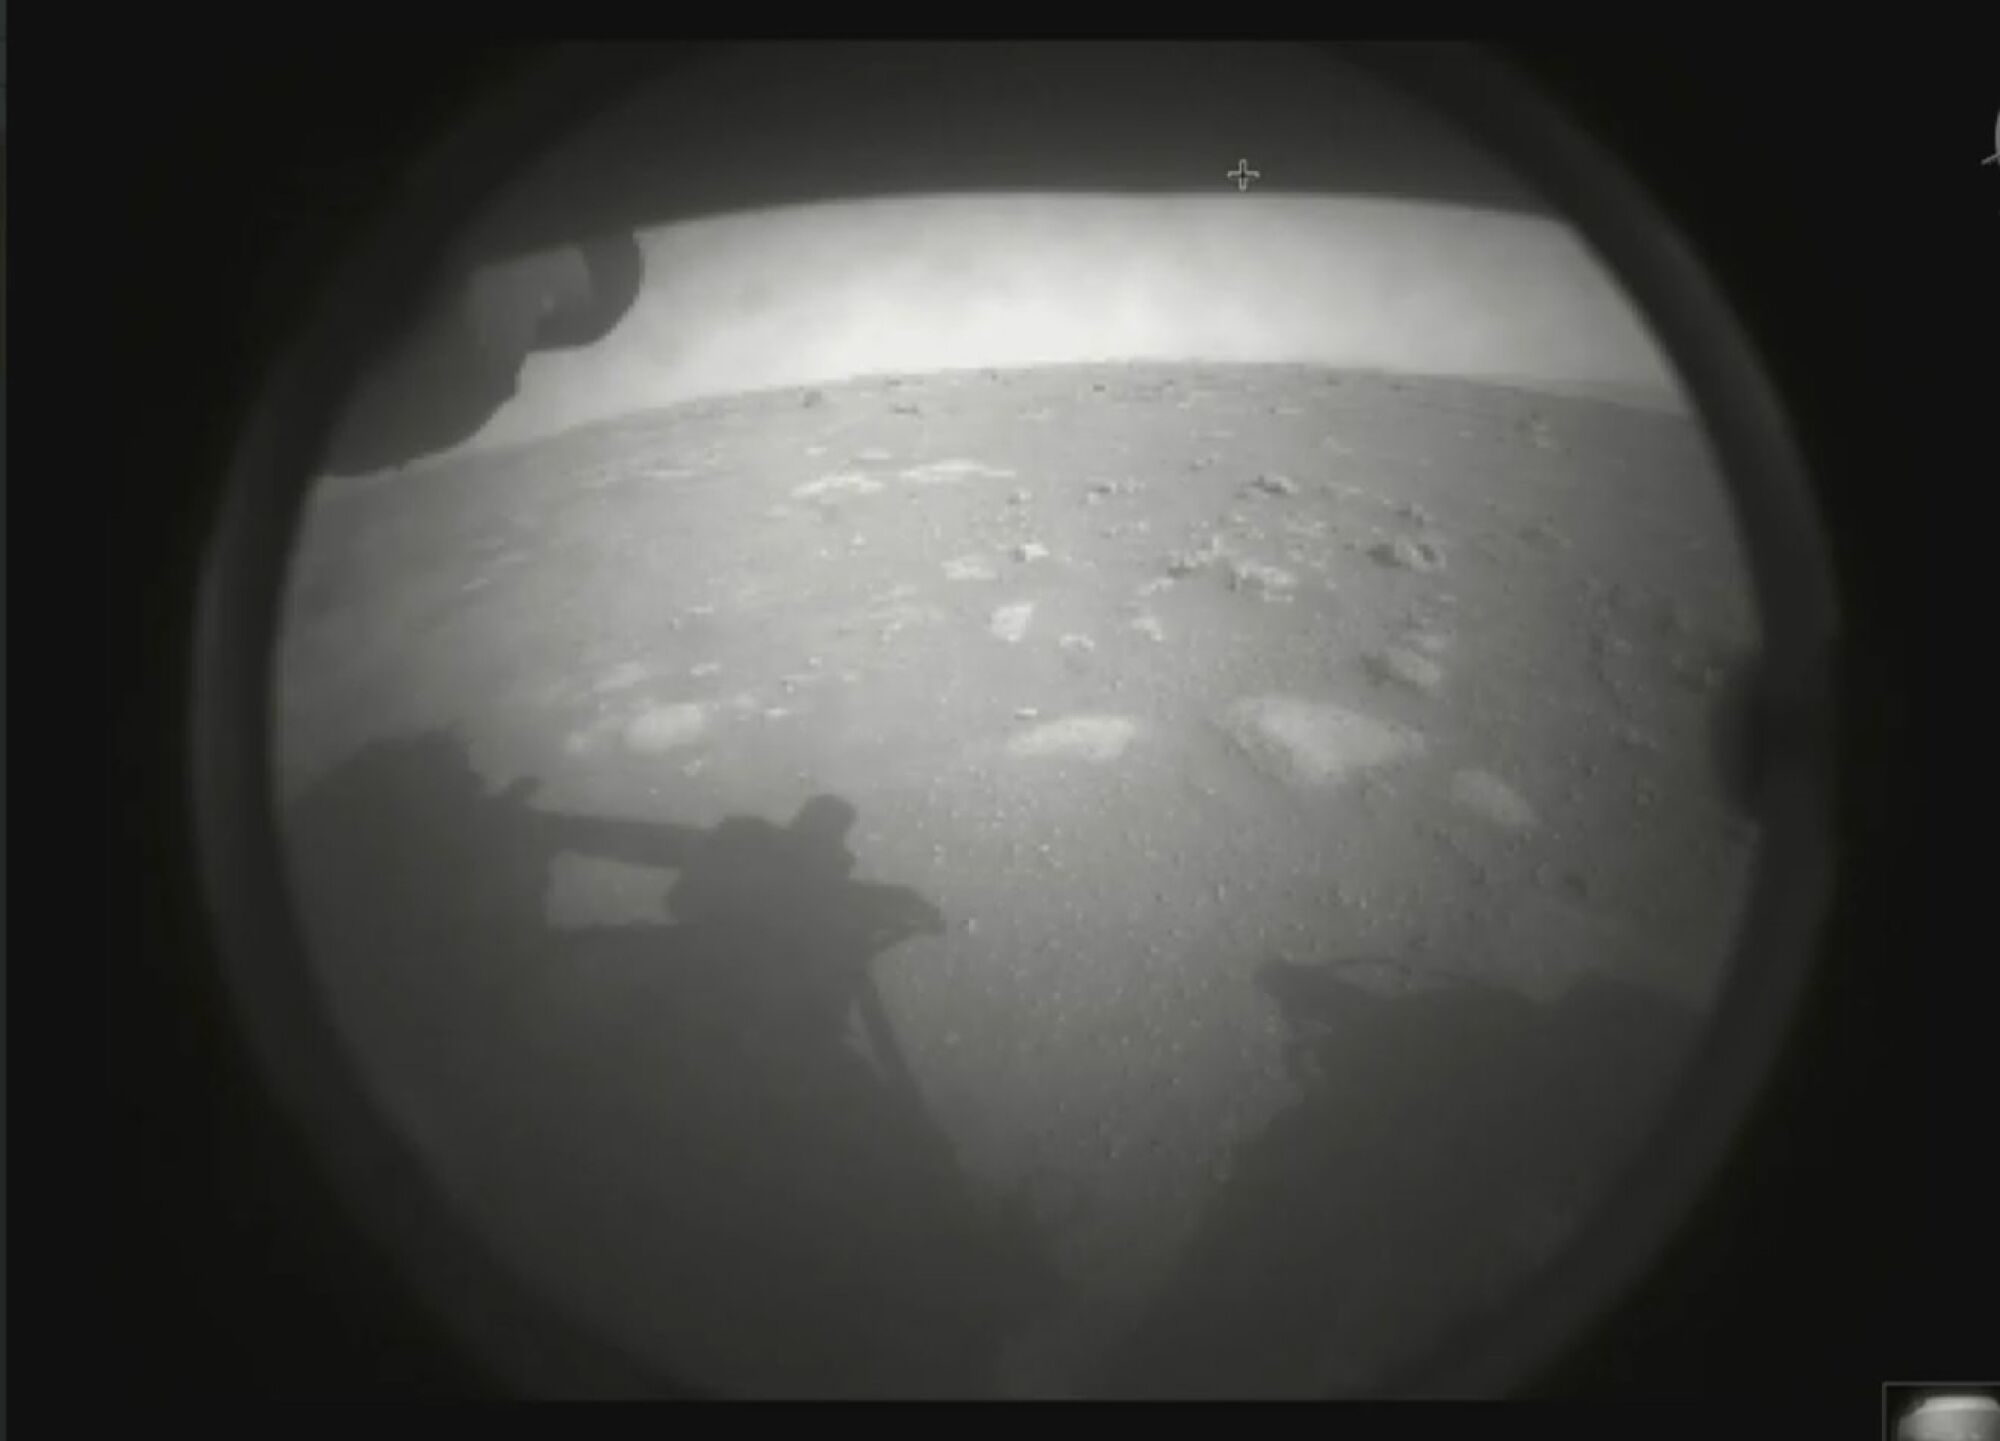 Rover image of Mars surface